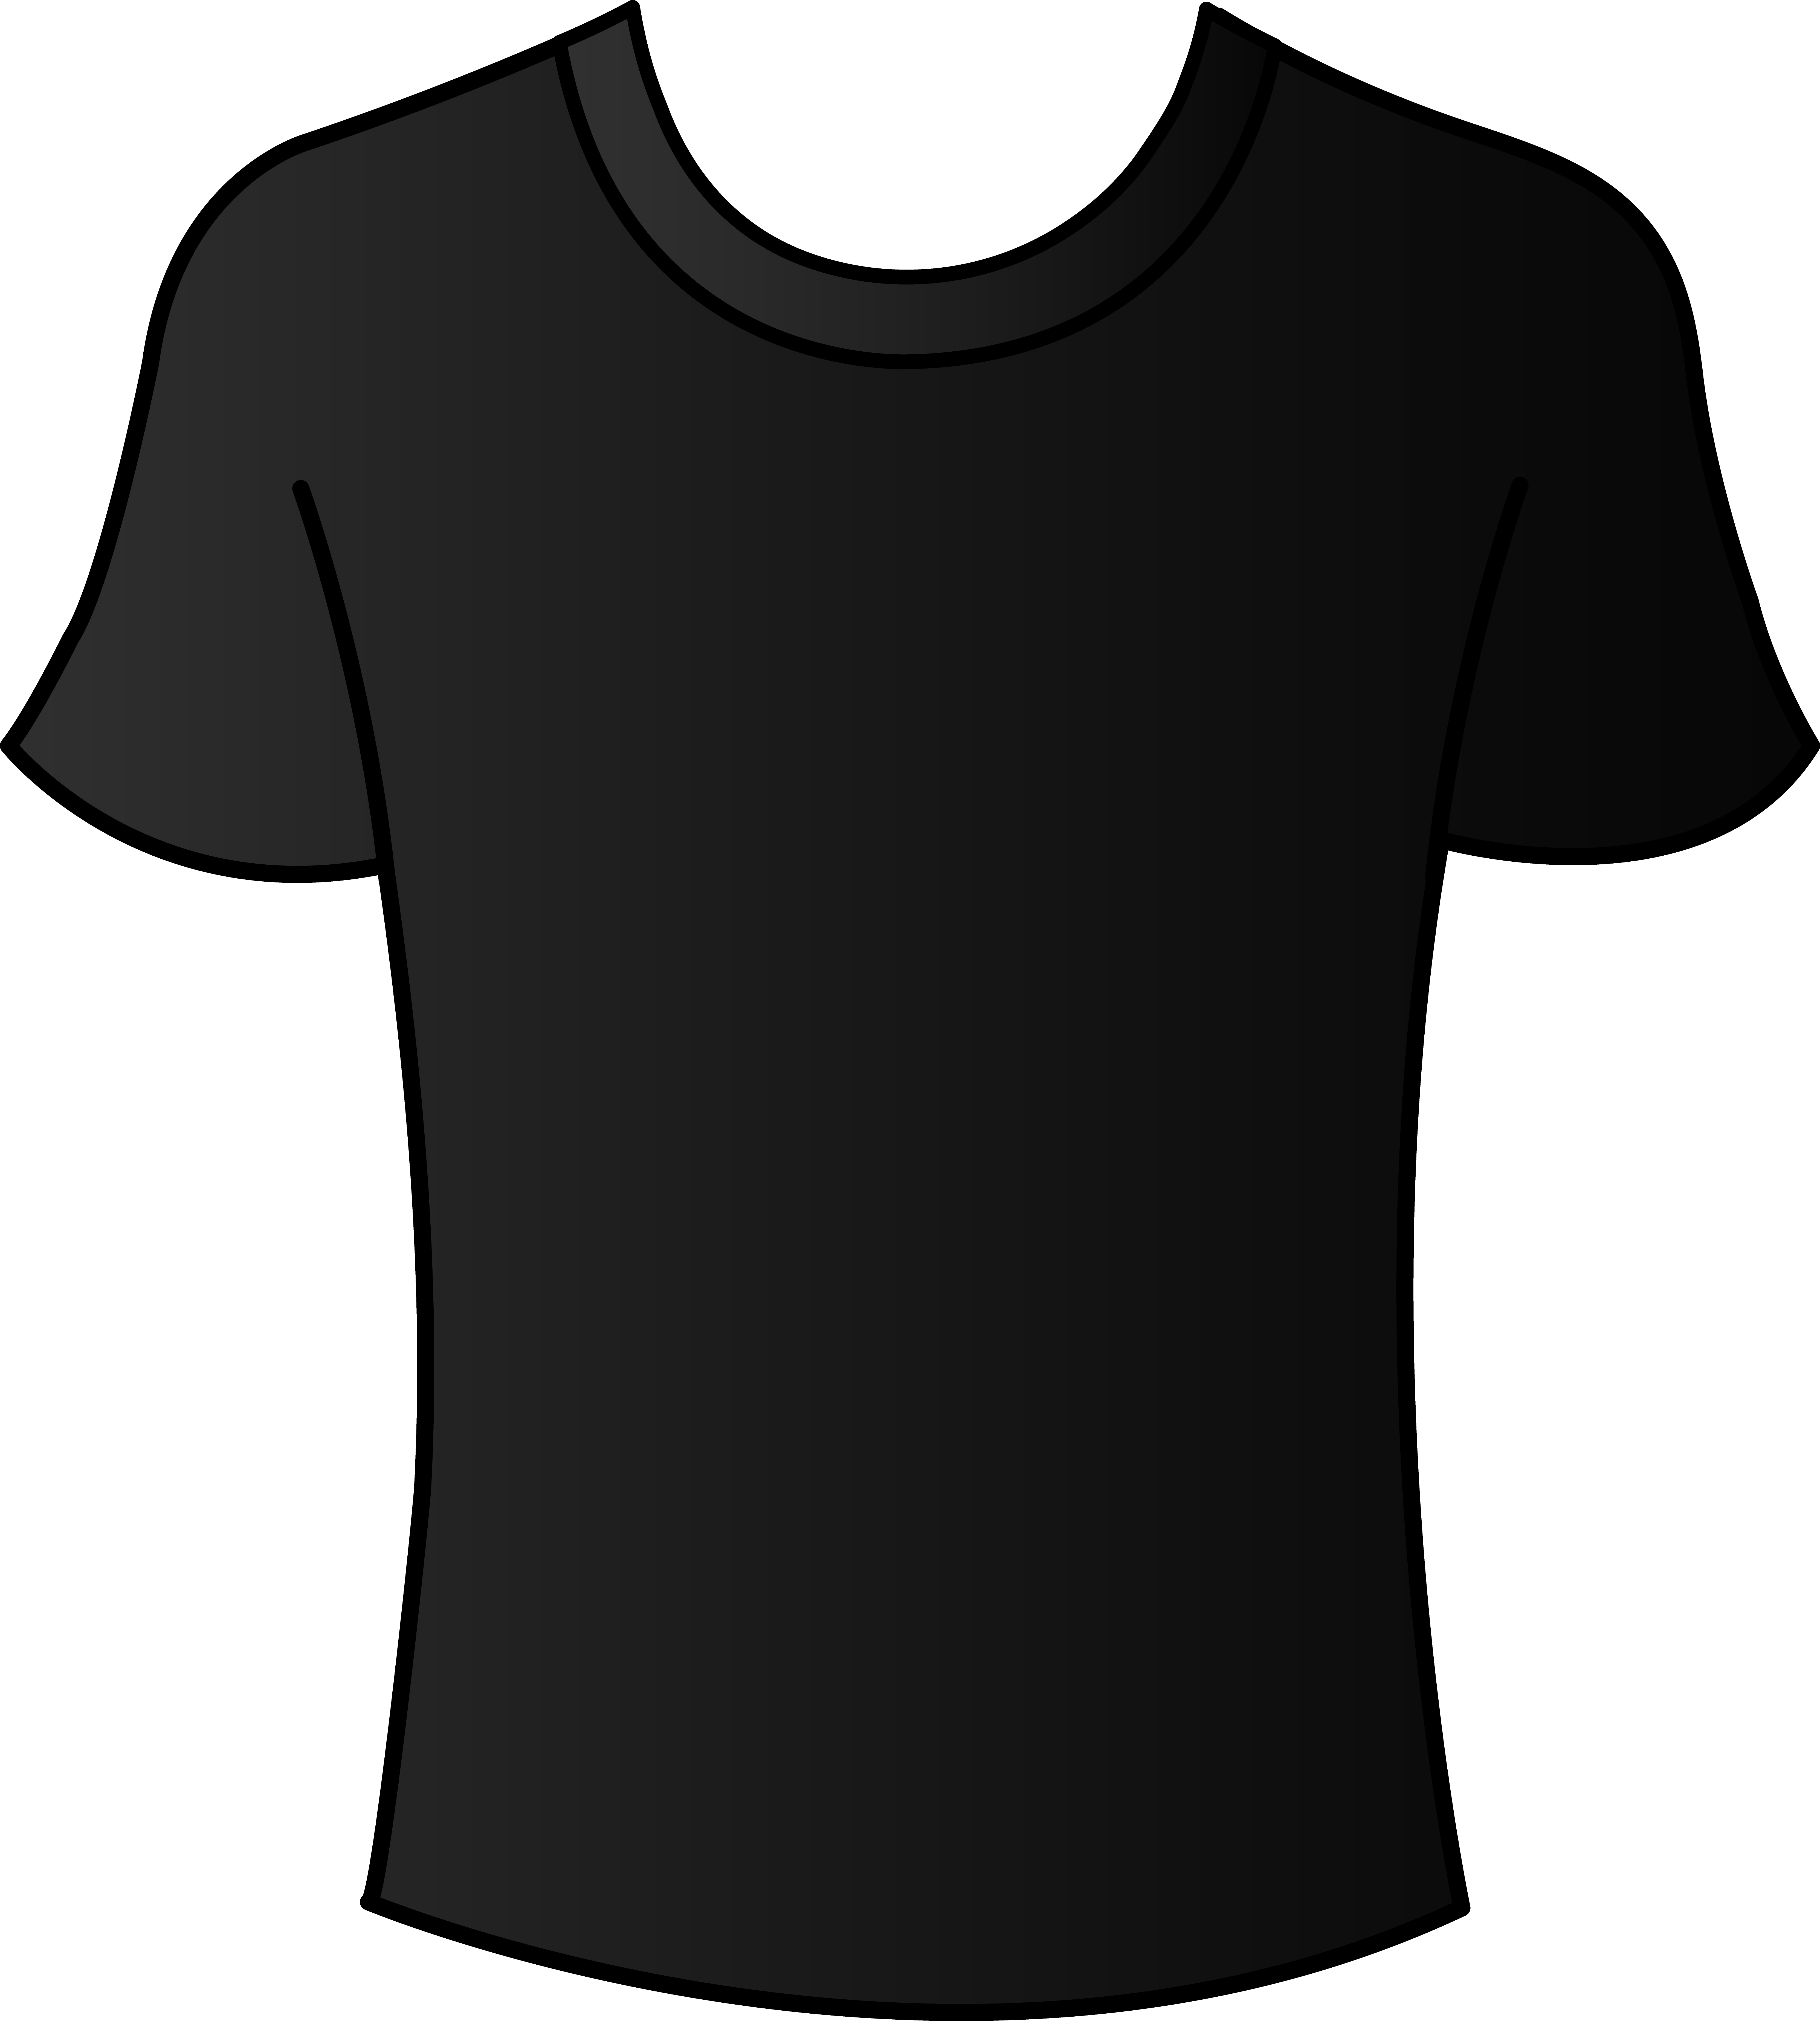 free clipart for t shirt design - photo #7